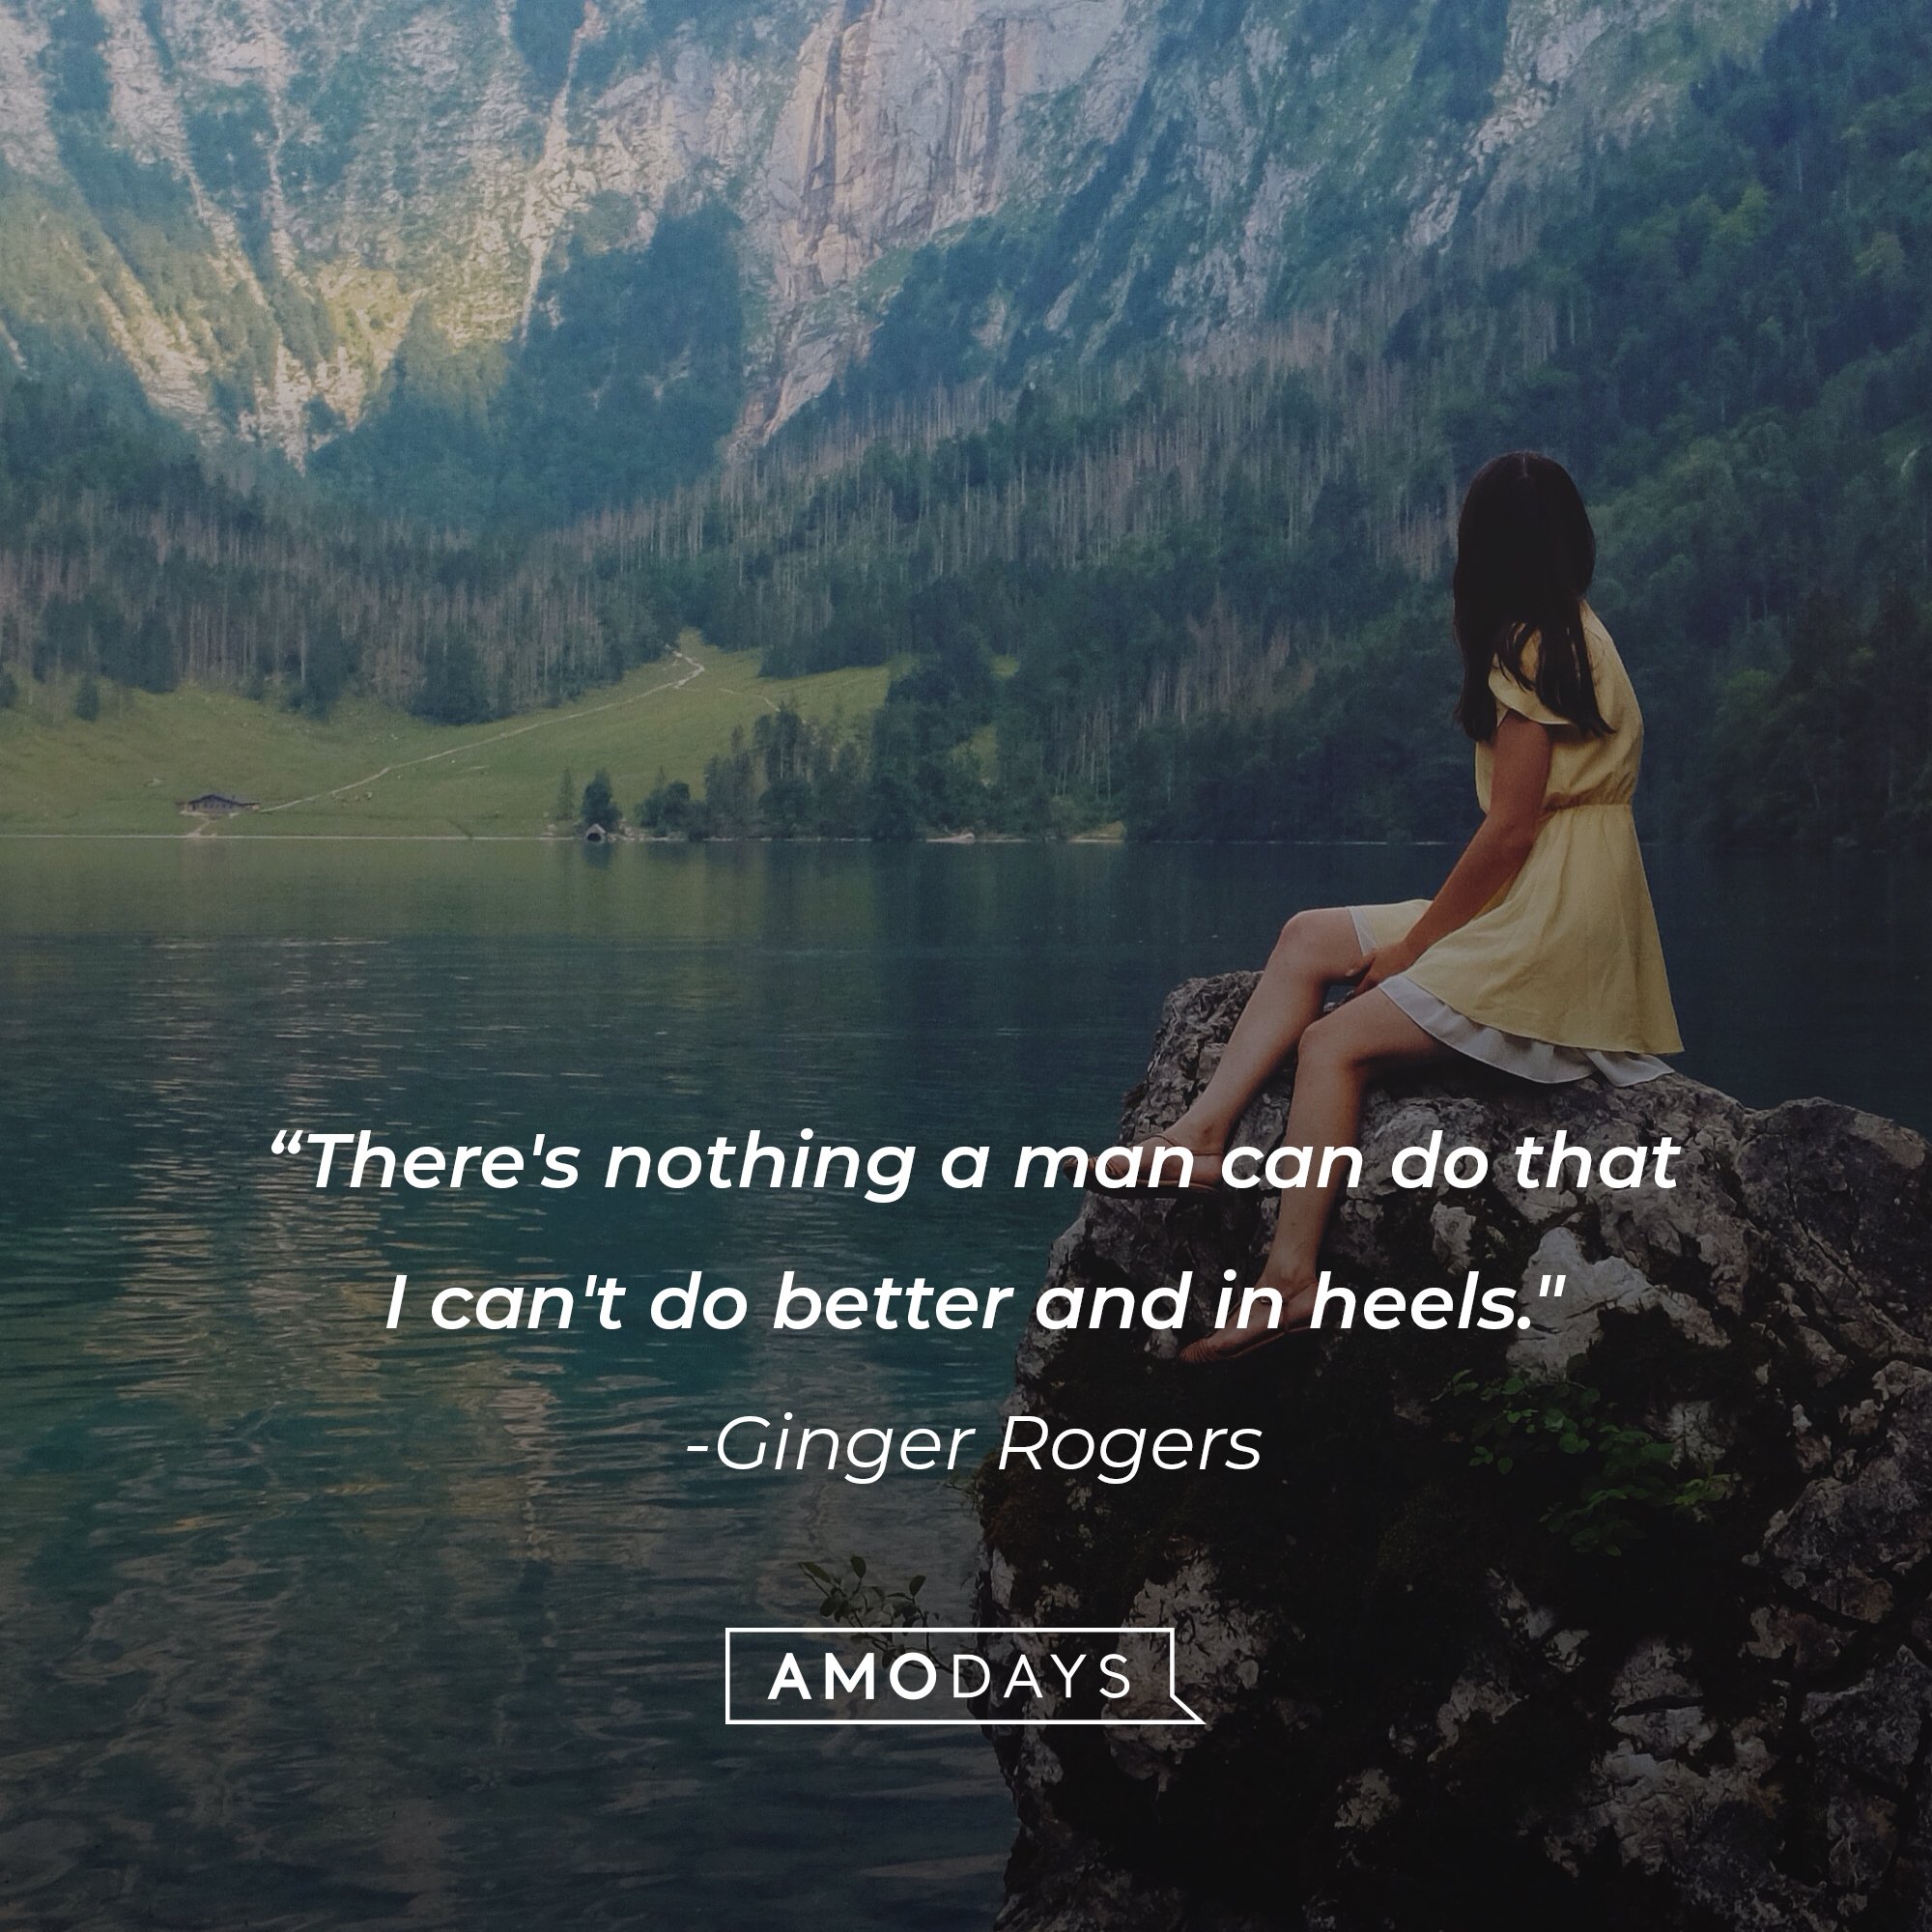 Ginger Rogers’ quote: “There's nothing a man can do that I can't do better and in heels."  | Image: AmoDays